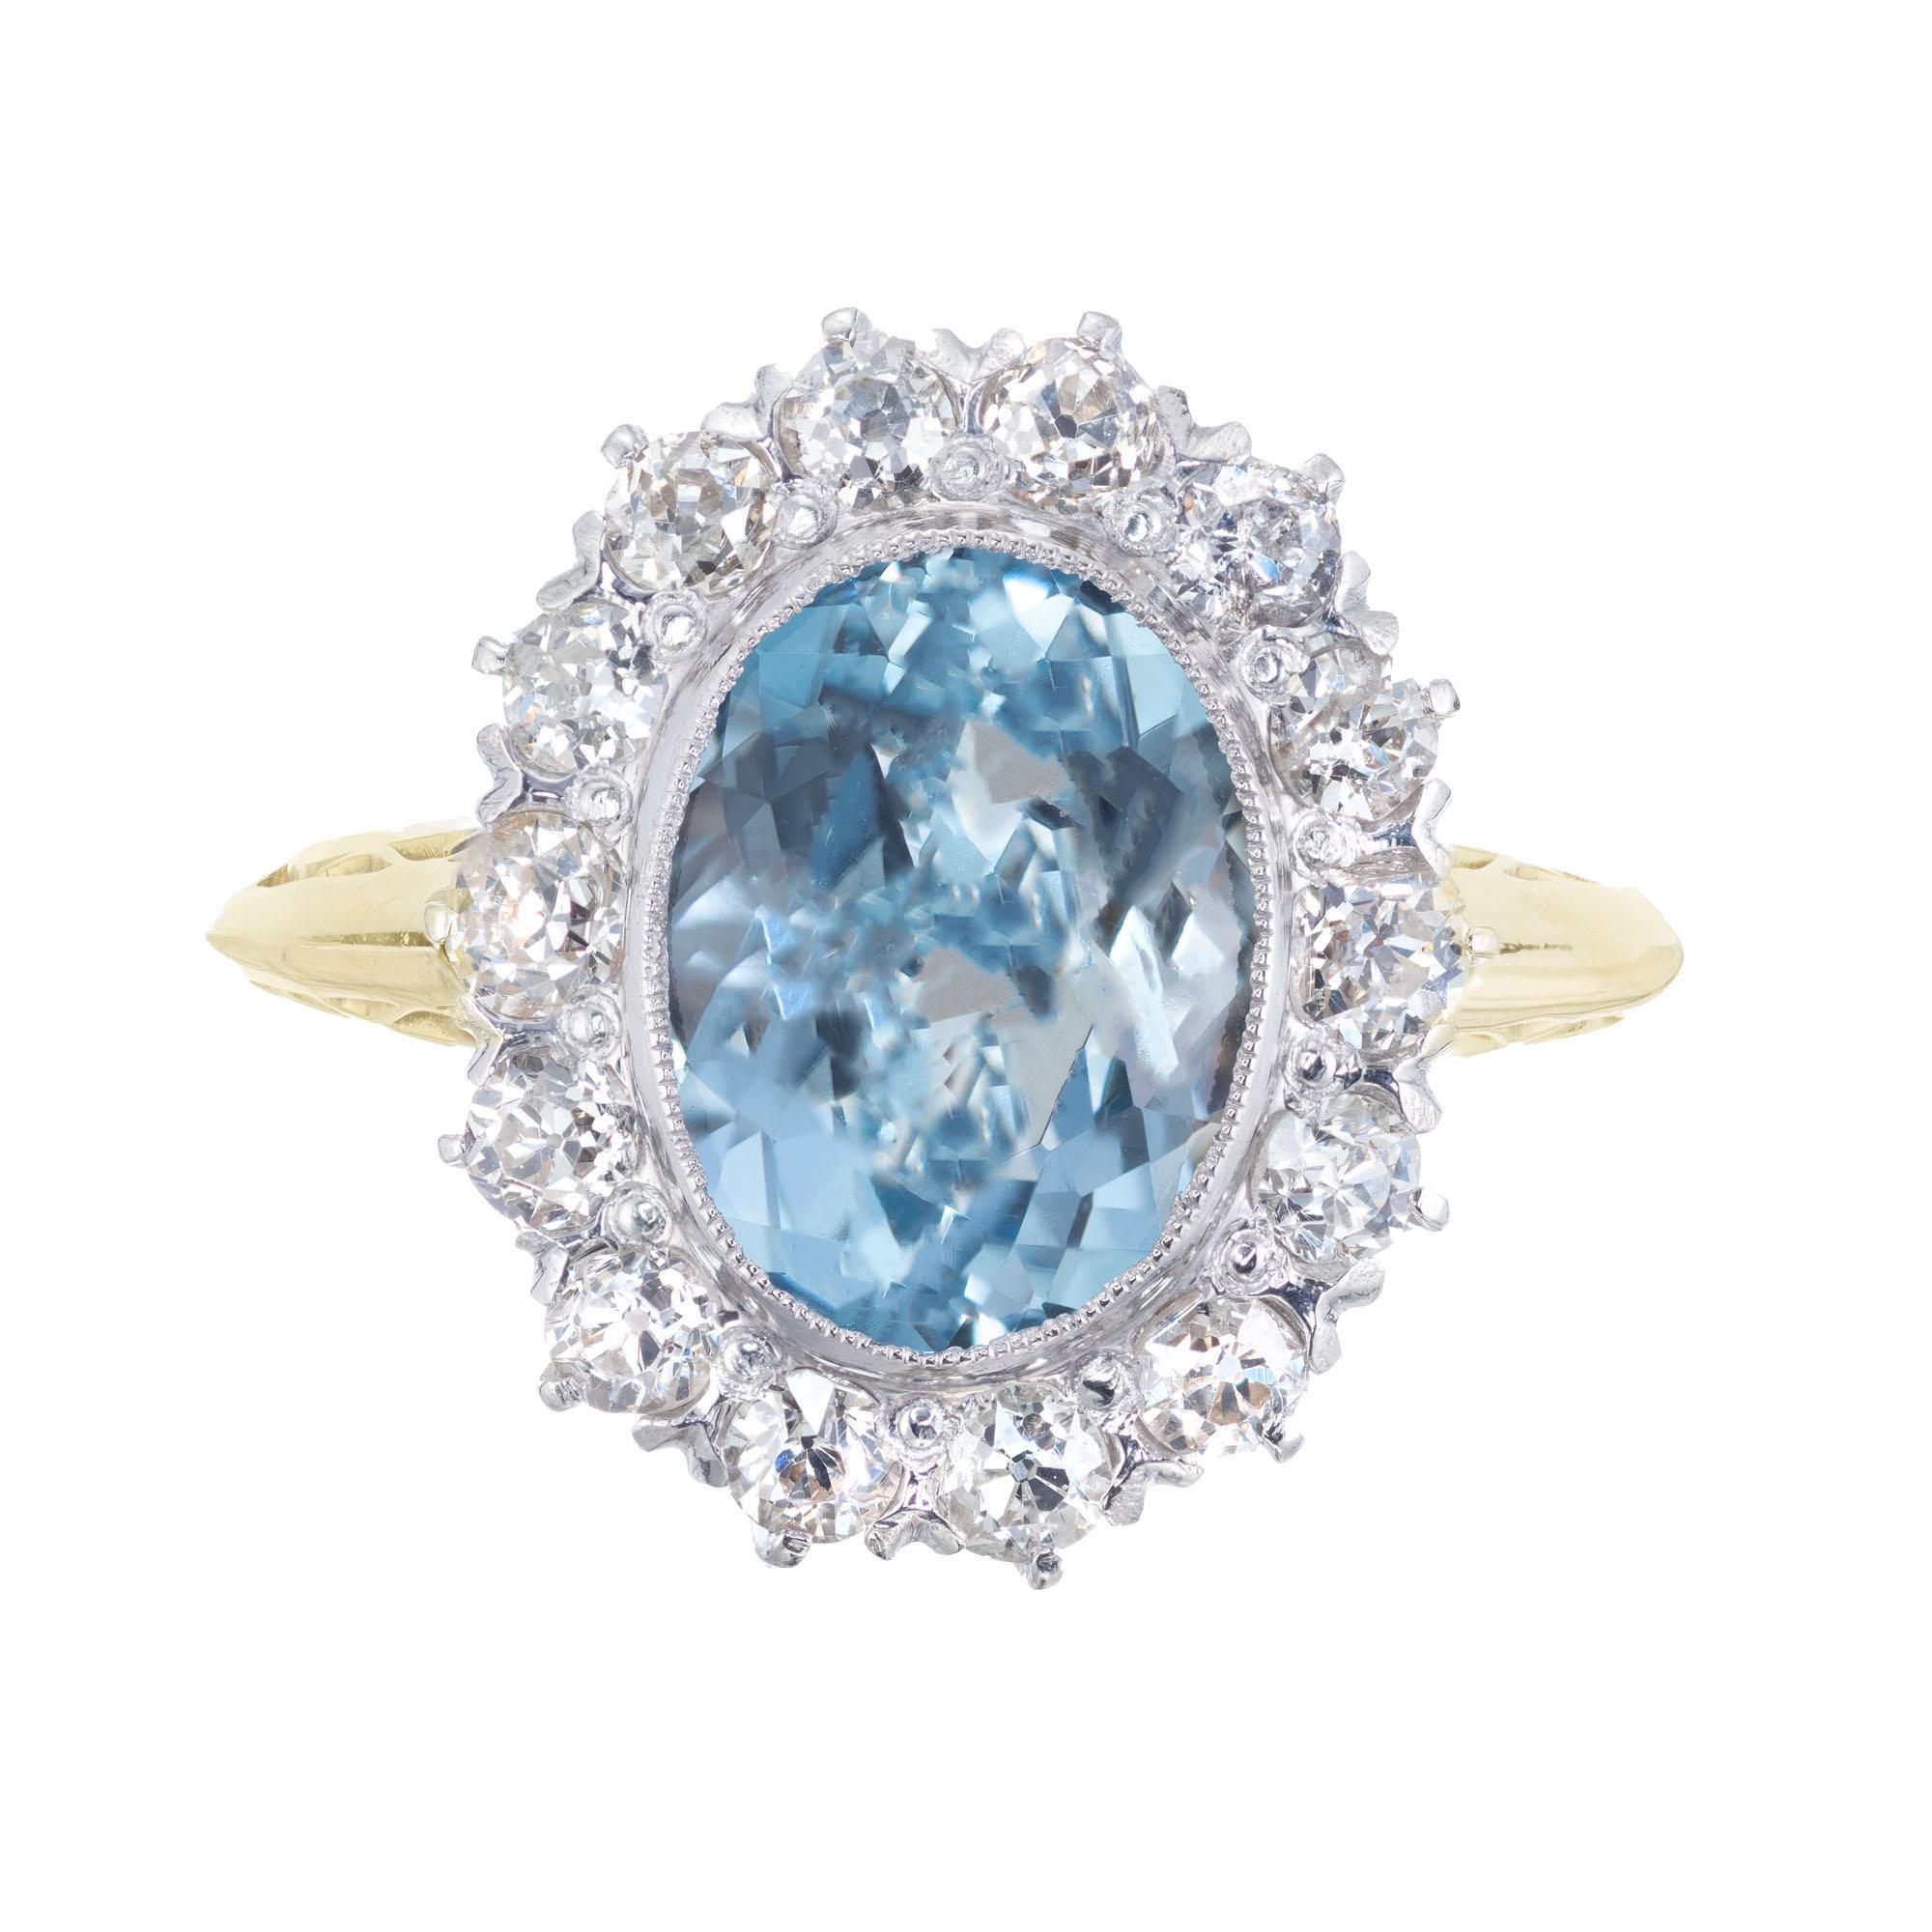 1930's Art Deco Oval aquamarine center stone with a halo of 14 old European cut accent diamonds in a 14k yellow and white gold setting. 

1 oval blue Aquamarine, approx. 2.00ct
14 old European cut diamonds I-J SI-2, approx. .42cts
Size 4.75 and